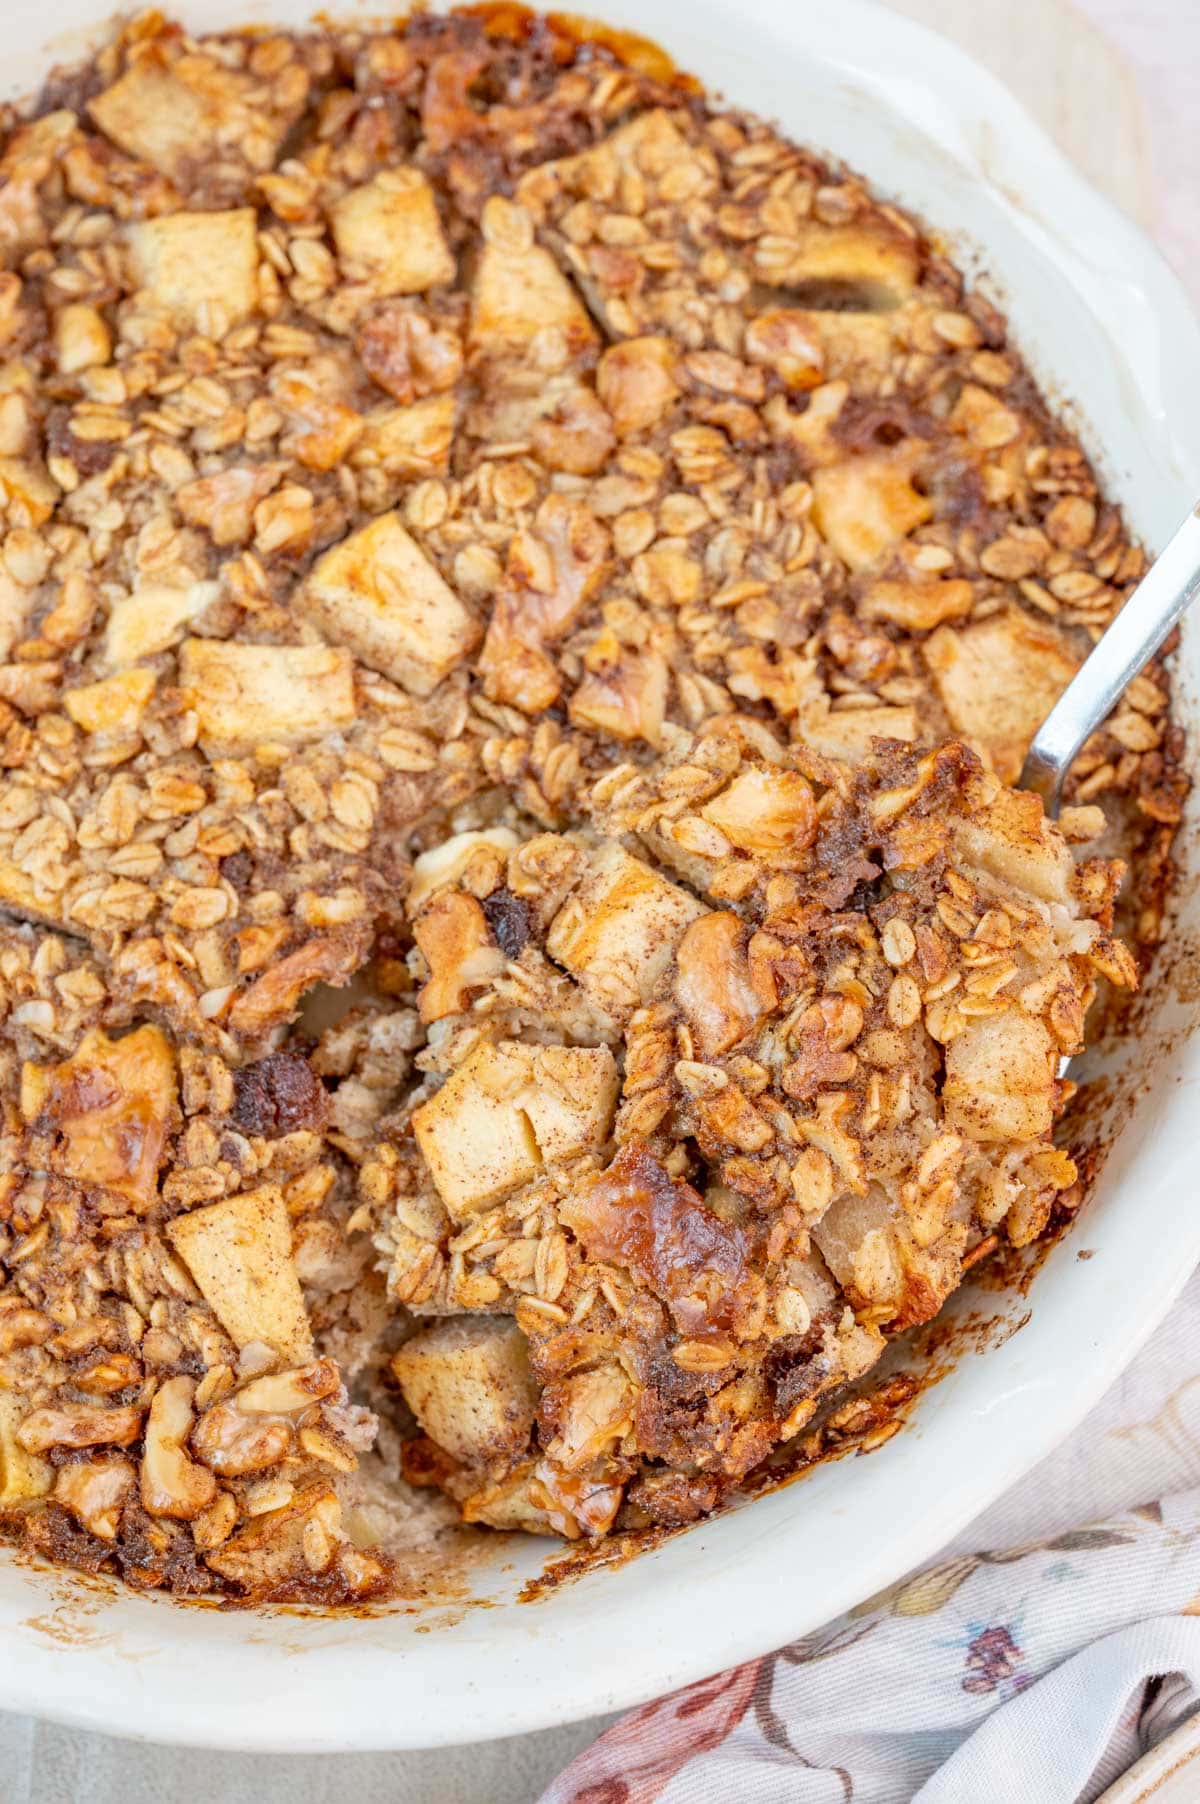 A close-up photo of apple baked oatmeal in a white baking dish.